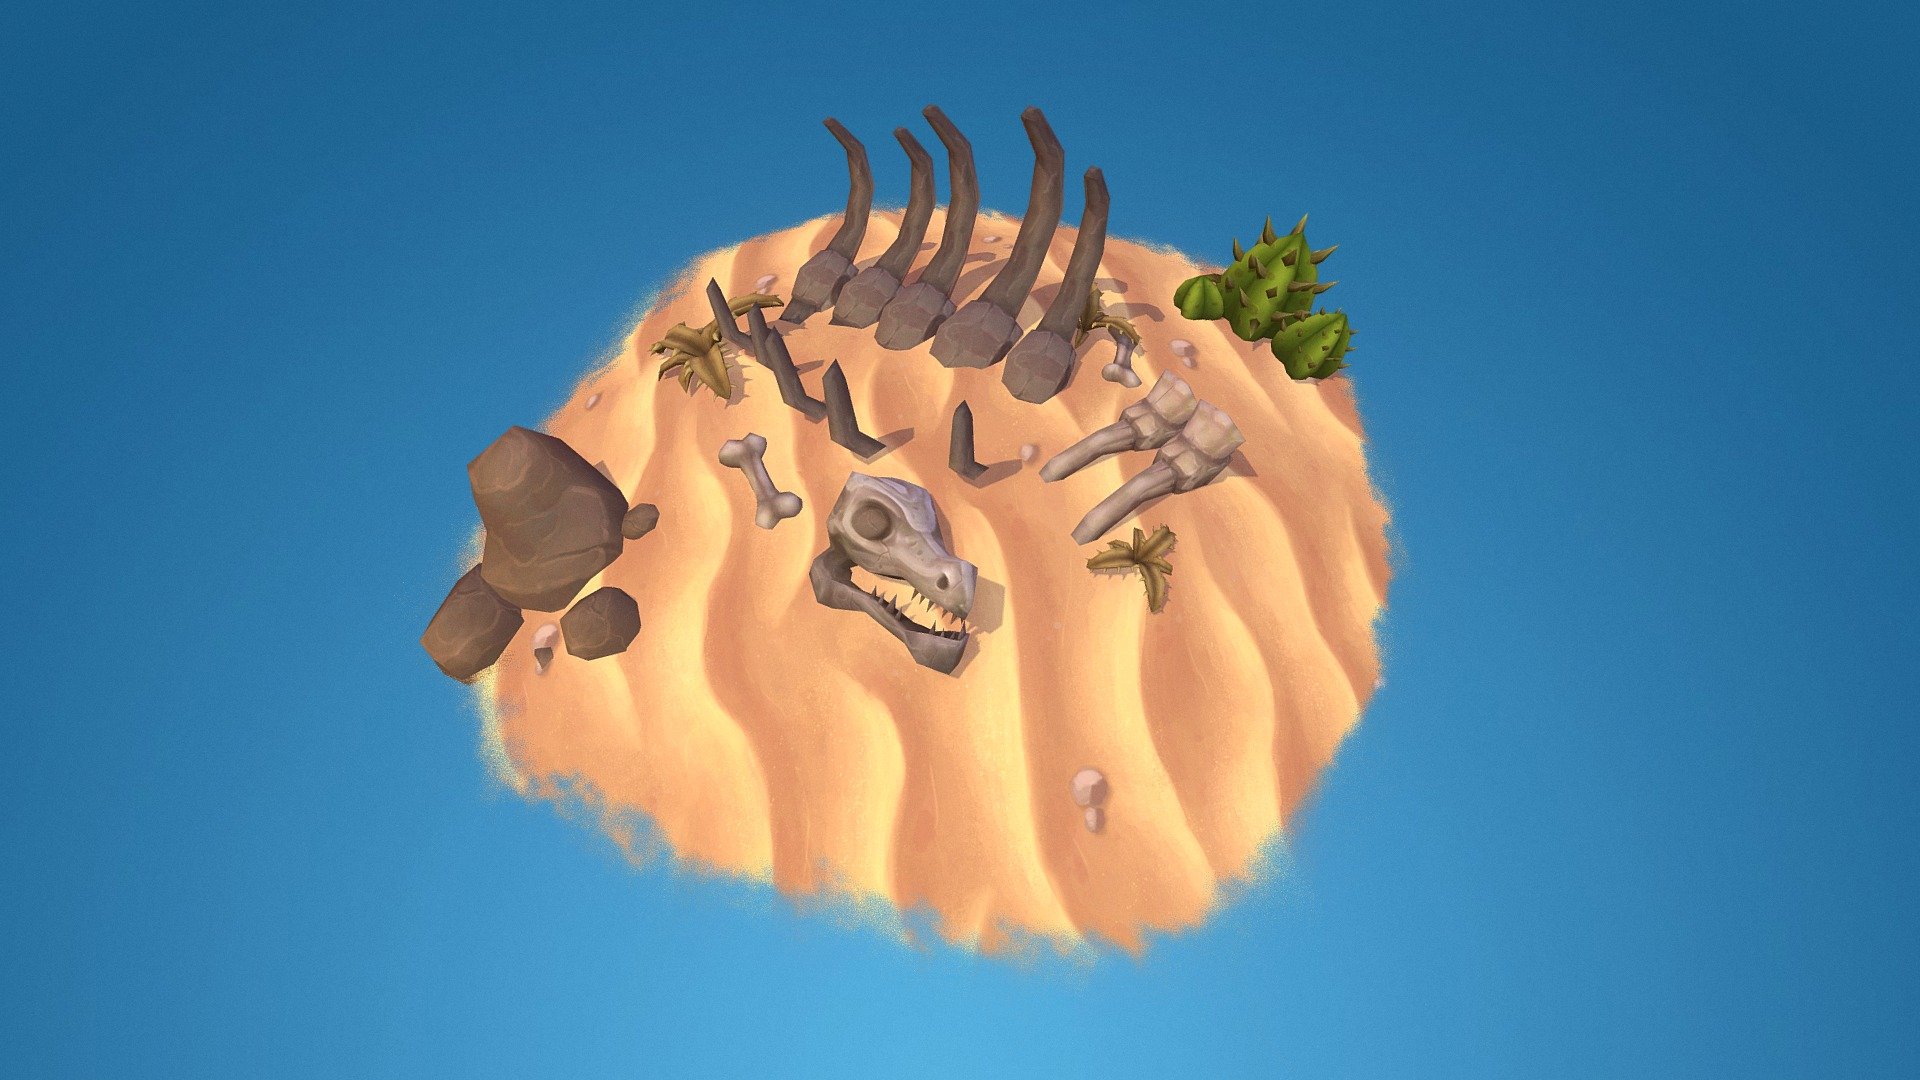 Sunny and lovely place to die from dehydration :D
All assets are game ready ;)

More works can be found here
https://www.zugzugstudio.com/
https://www.artstation.com/zugzug - Desert Diorama - Buy Royalty Free 3D model by ZugZug Art (@zugzug) 3d model